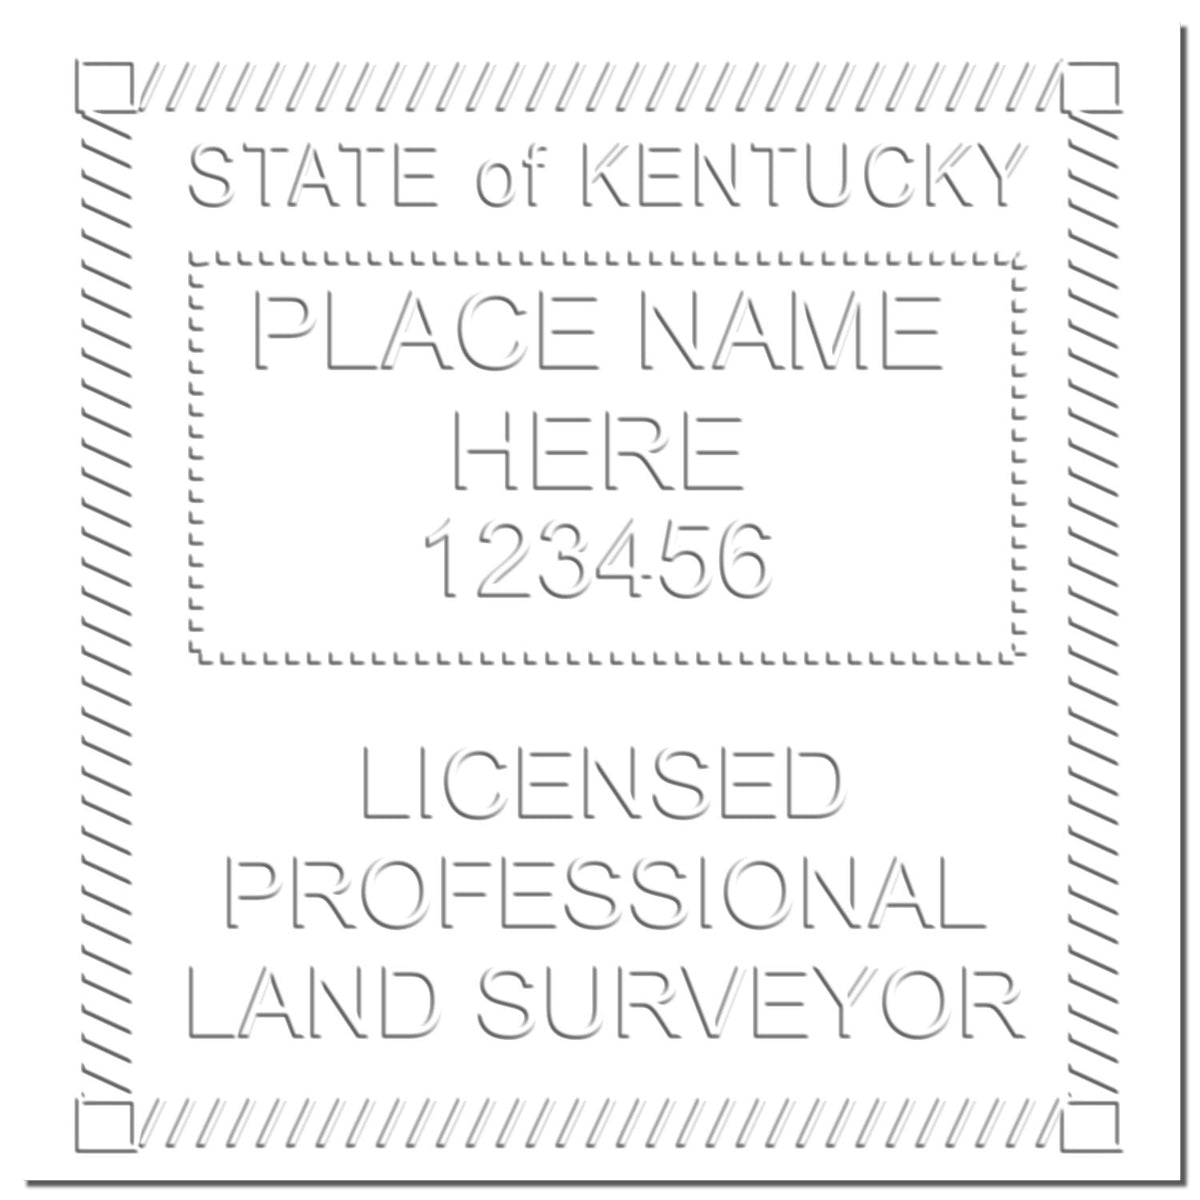 This paper is stamped with a sample imprint of the Long Reach Kentucky Land Surveyor Seal, signifying its quality and reliability.